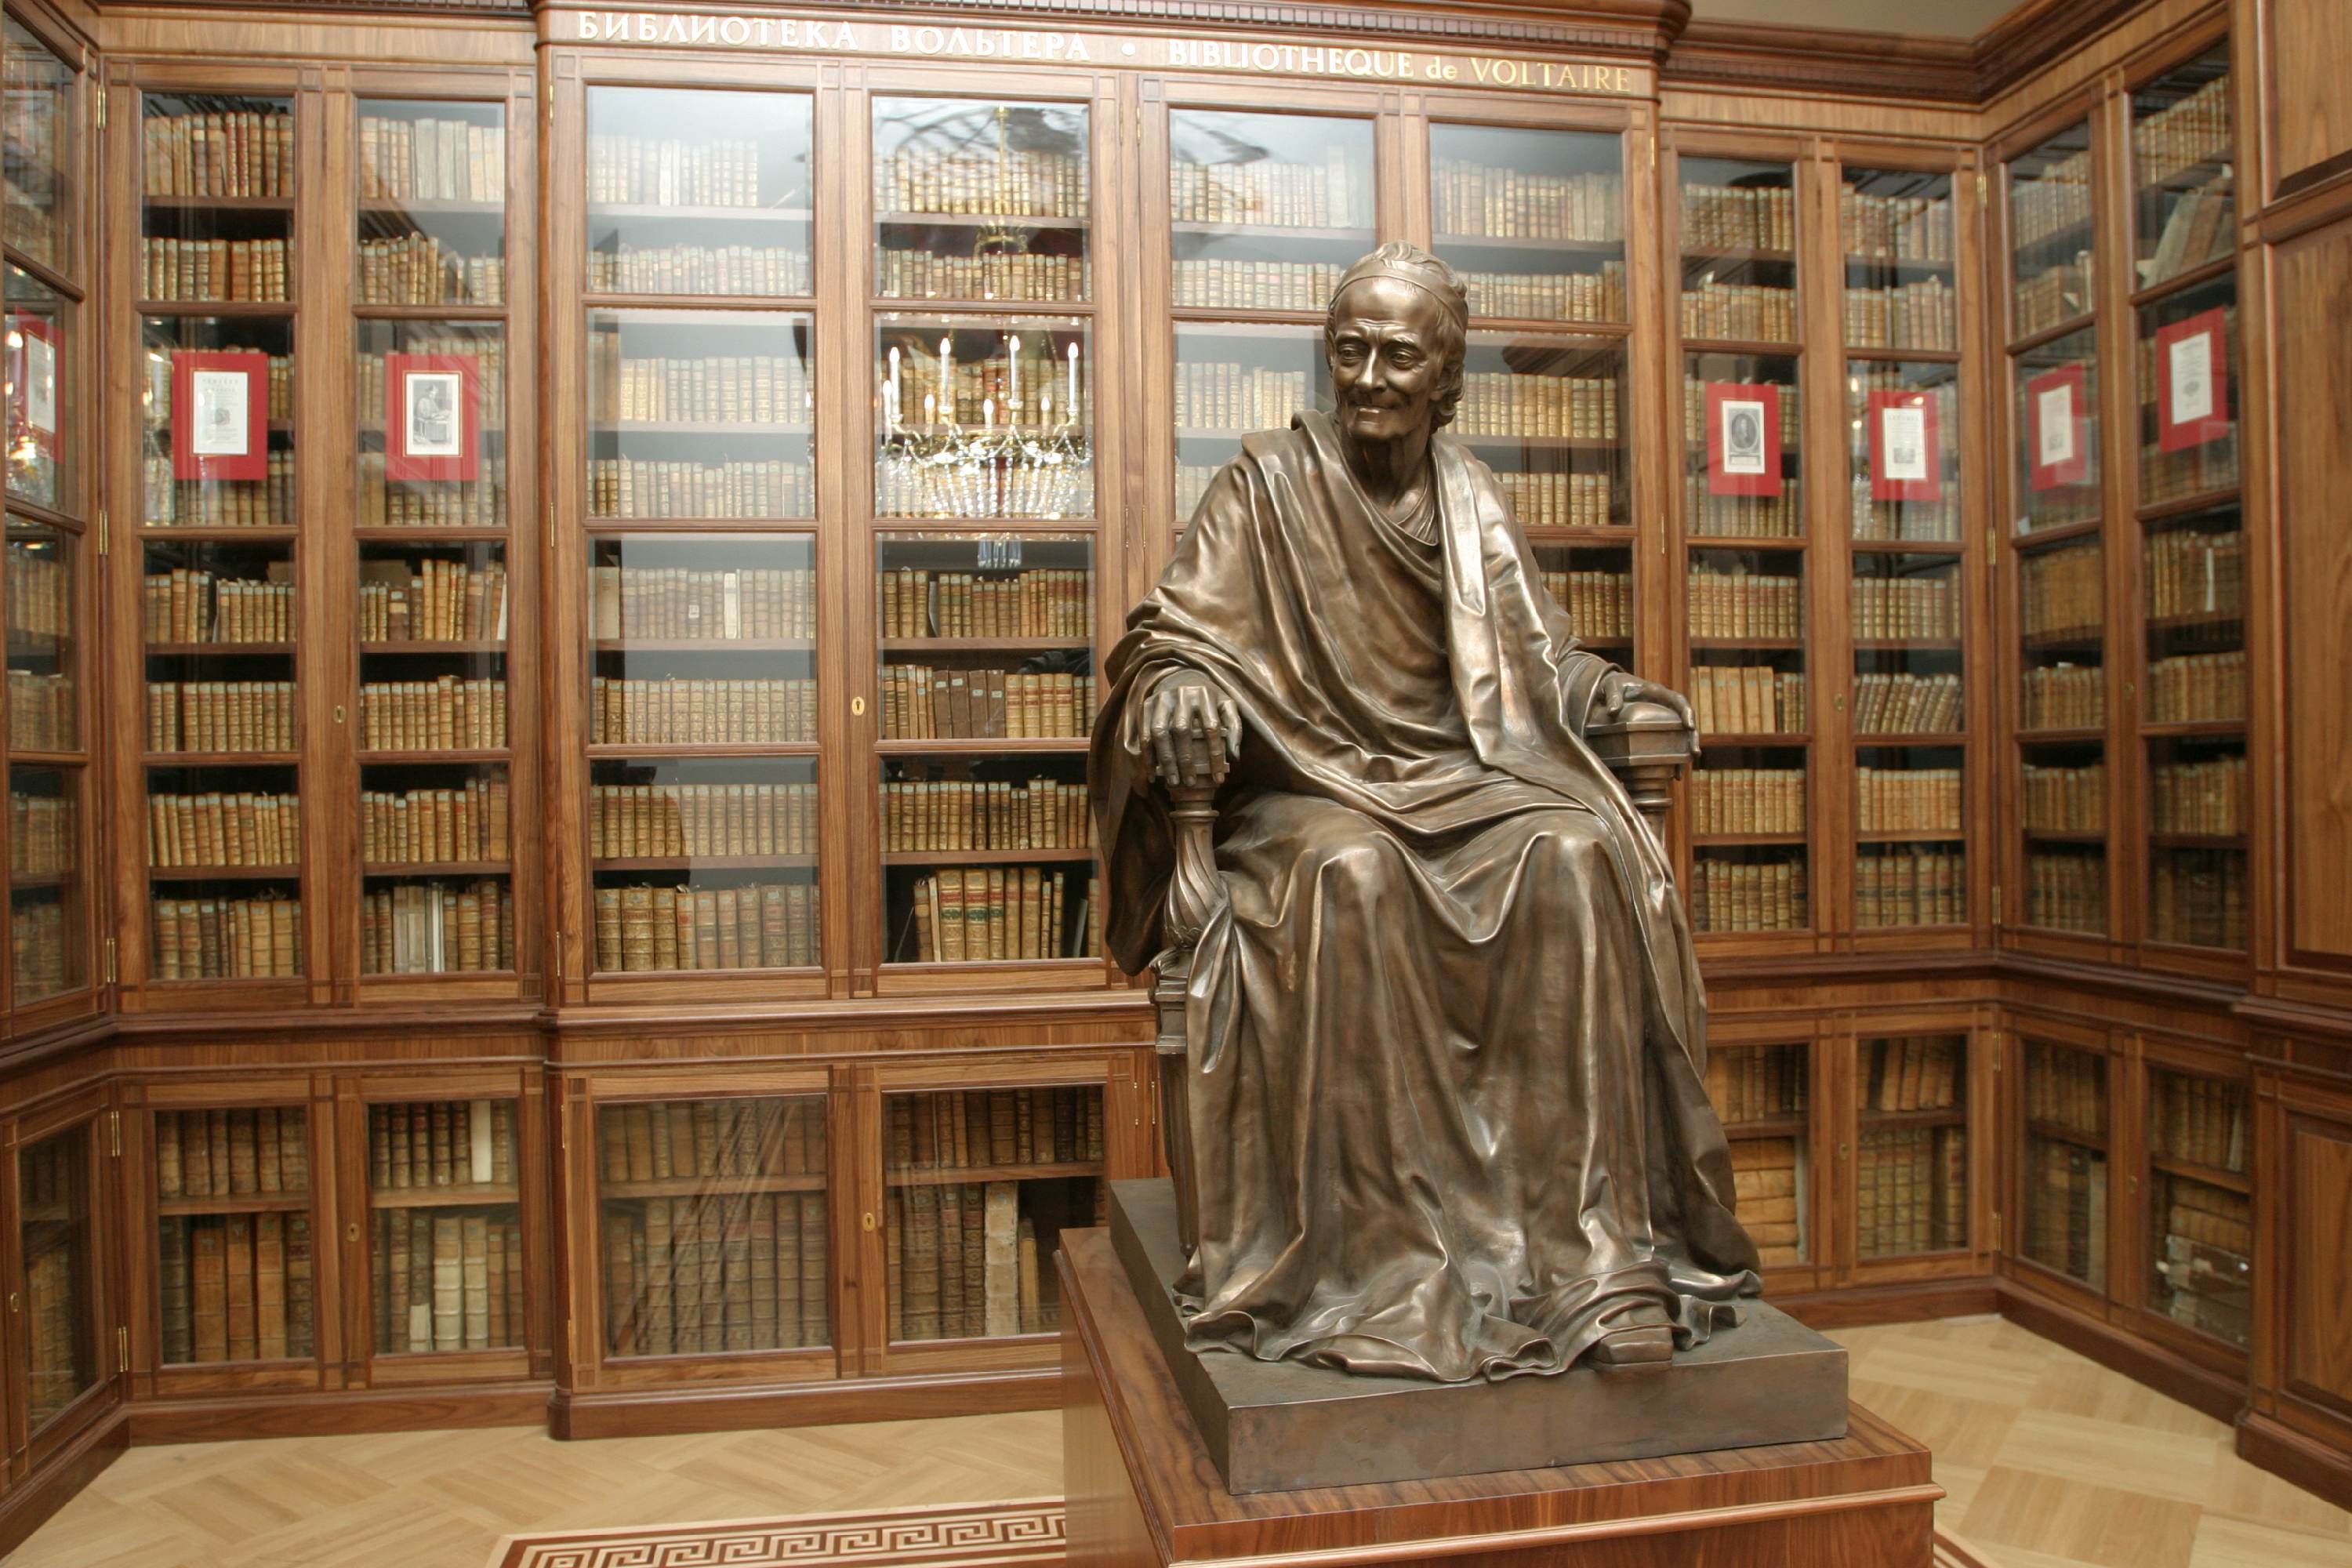 Statue of Volaire in the Volaire Library